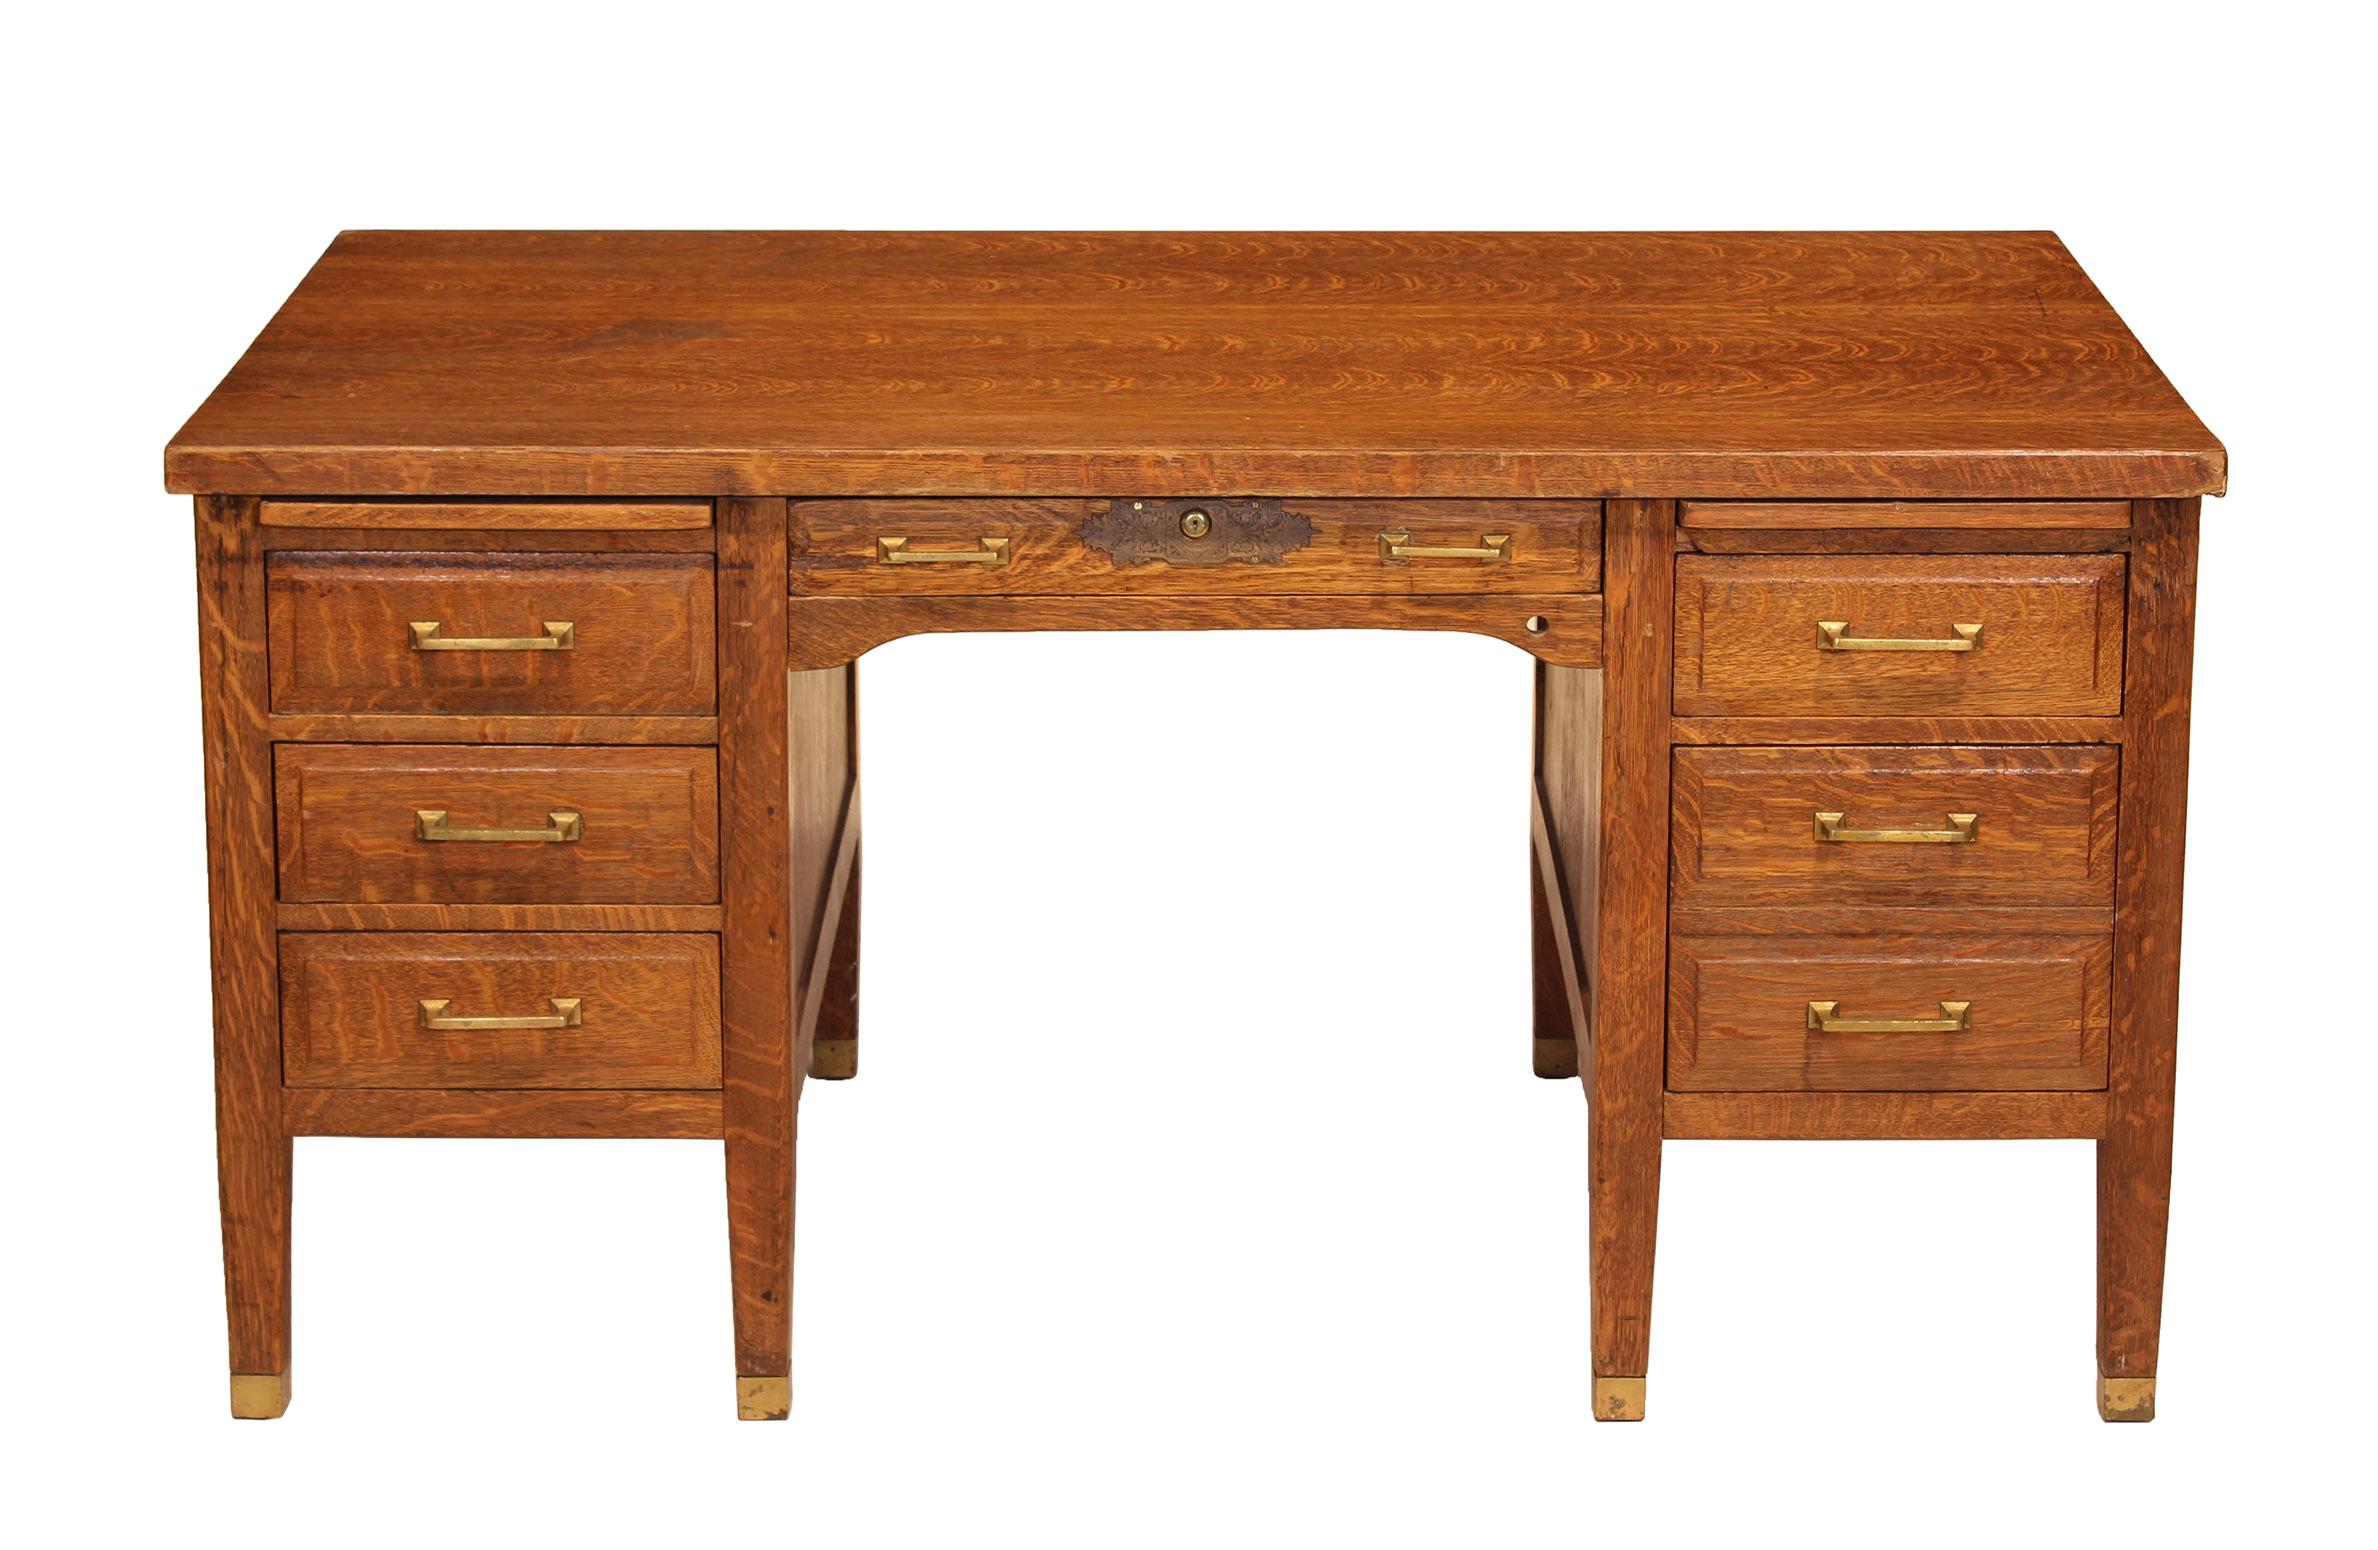 Authentic 1940s tiger oak teachers' desk. Solid work desk featuring brass handles, feet caps and decorative lock. Key included and mechanism is fully functional - will lock all drawers. Desk measures 60